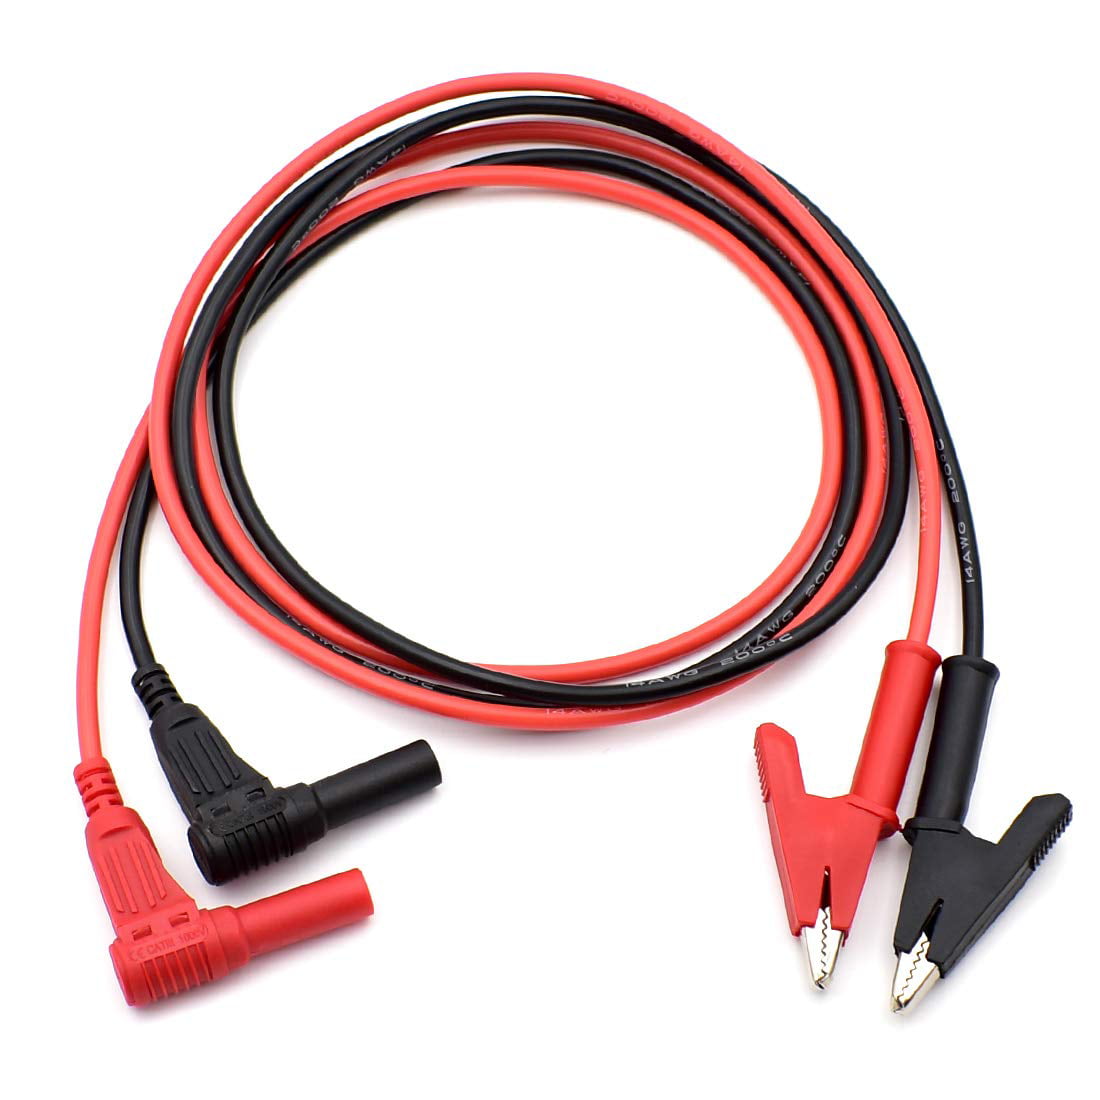 Details about   Multimeter Test Banana Plug To Test Hook Clip Probe Cable For Multimeter QW 